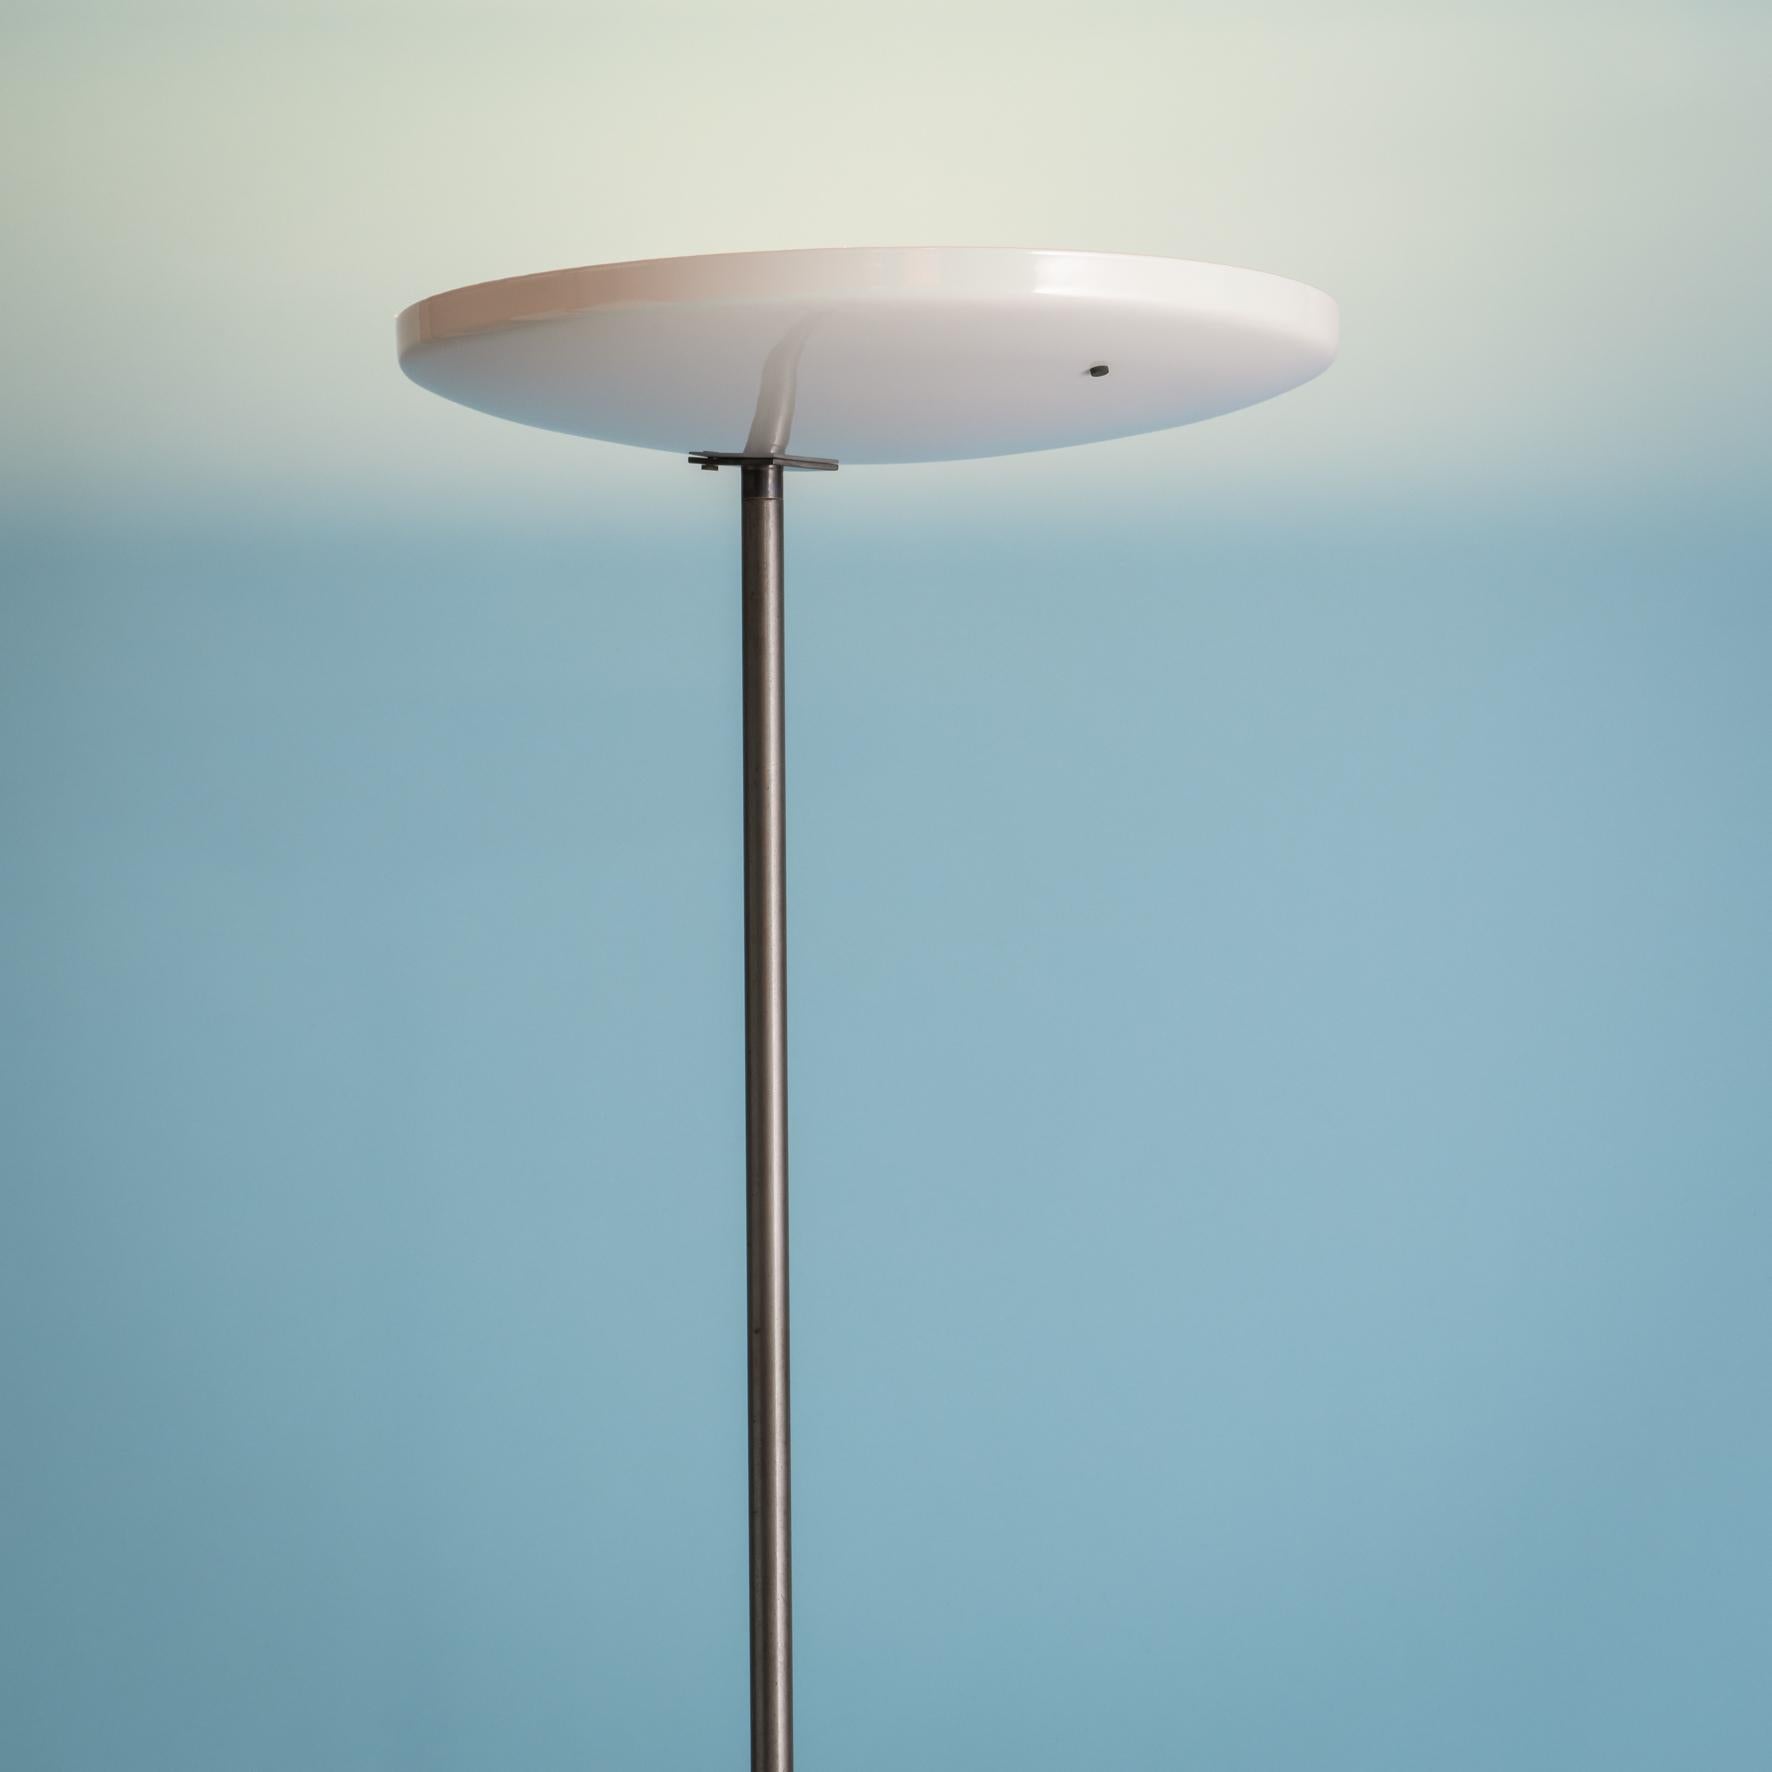 Important floorlamp, EFA edition, 1958
Varnished nickel-plated metal, varnished mahogany and ivory lacquered metal reflector
Measures: Height. 200 x Diameter. lampshade 56 x Diameter. base 35 cm
Reference : Joie et beauté dans la maison, Undated,